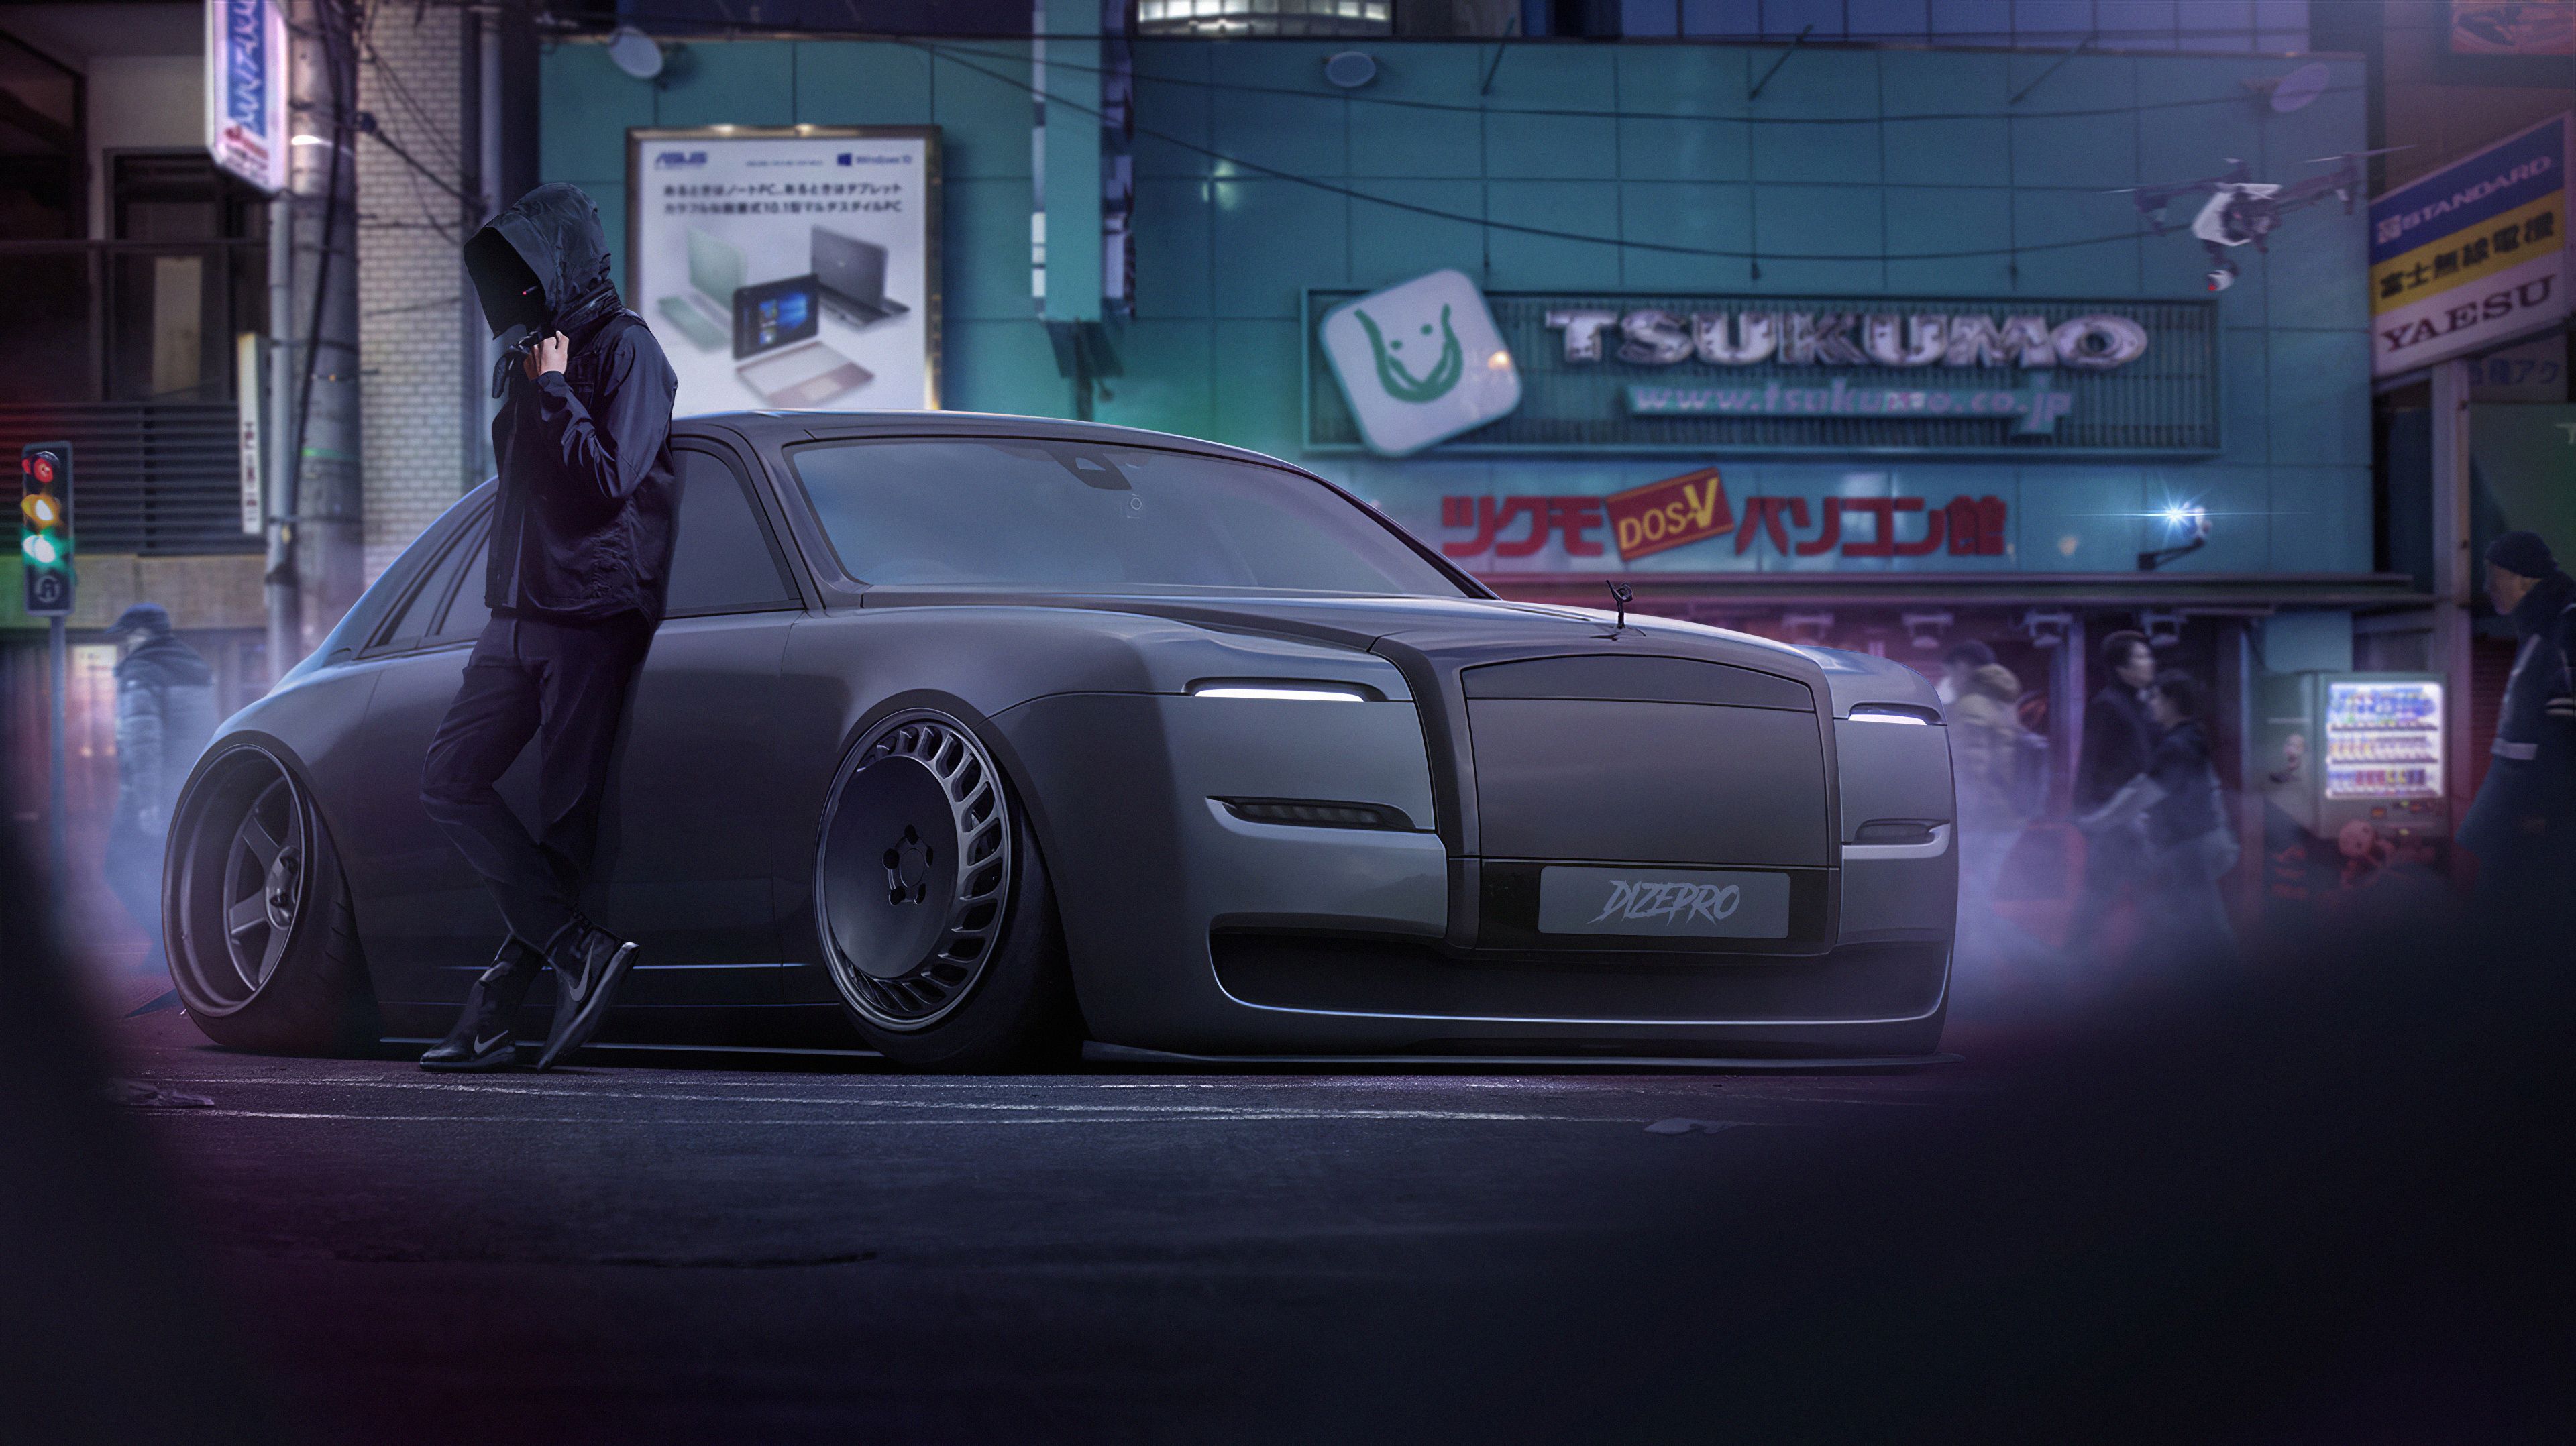 The Dark Rolls Royce 4k, HD Cars, 4k Wallpaper, Image, Background, Photo and Picture